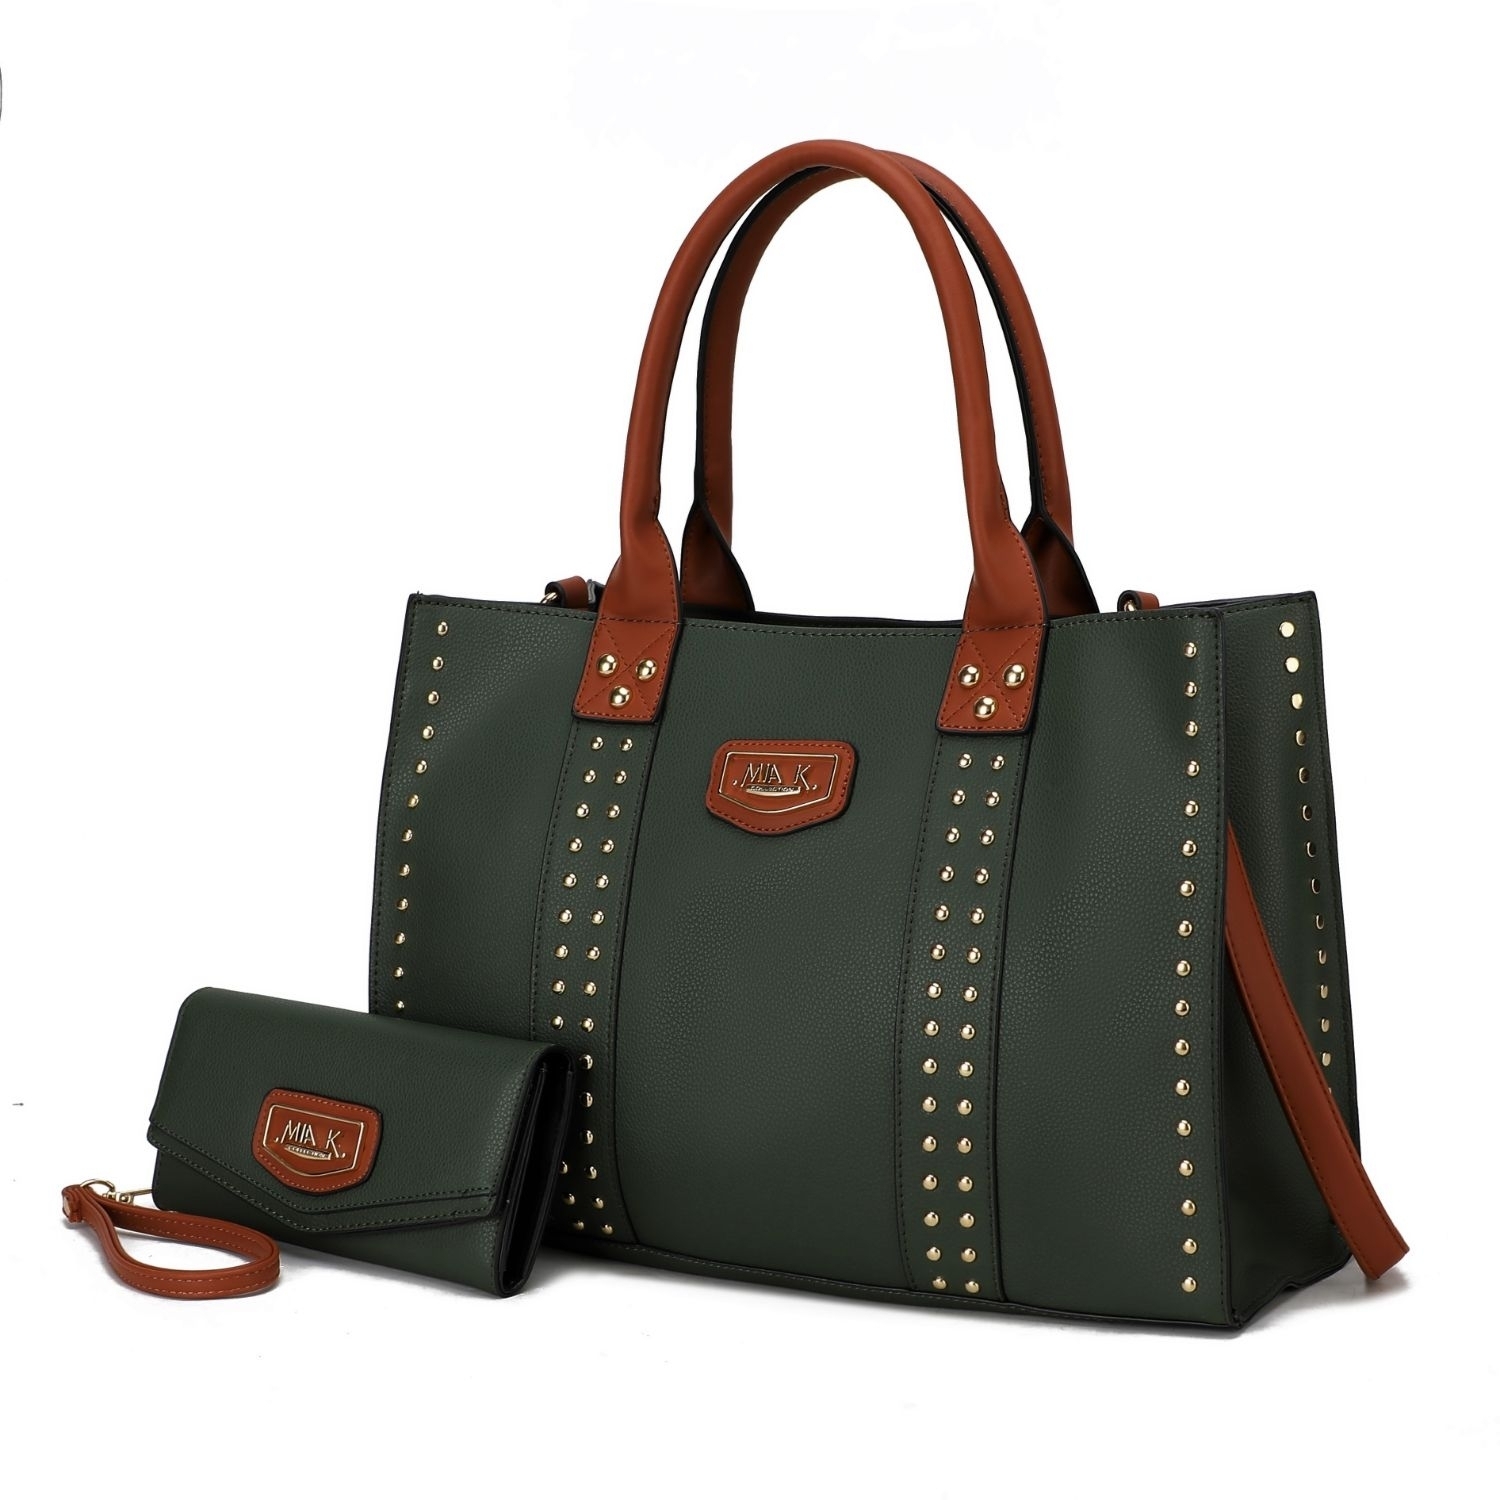 MKF Collection Davina Vegan Leather Women's Tote Handbag By Mia K With Wallet -2 Pieces - Olive